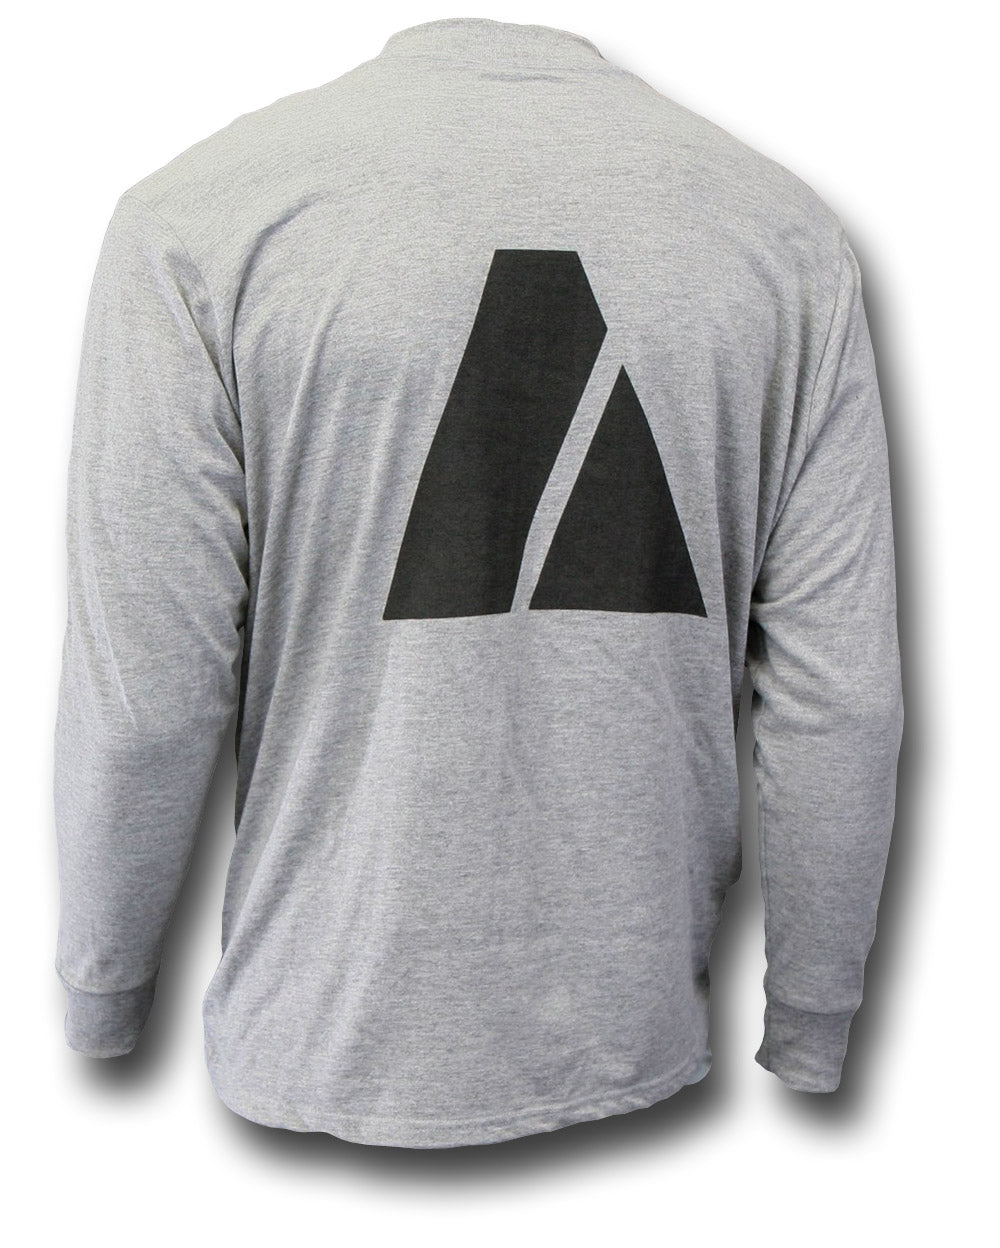 US ARMY DRI-RELEASE T-SHIRT - LONG SLEEVE, BACK